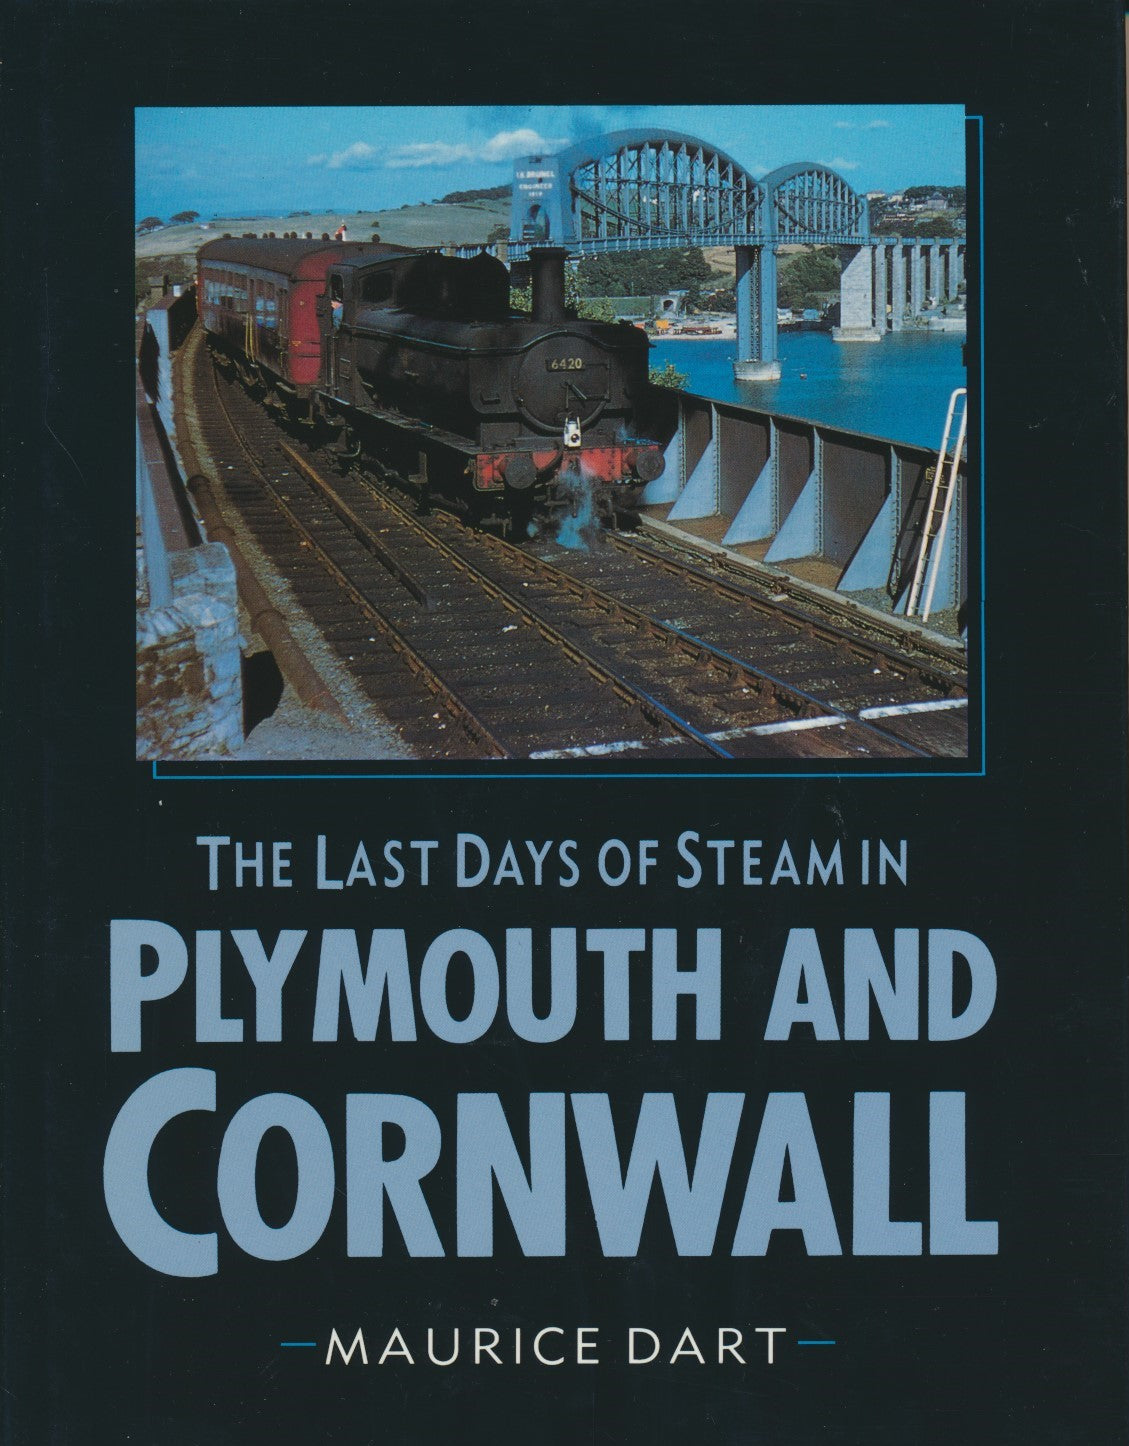 The Last Days of Steam in Plymouth and Cornwall